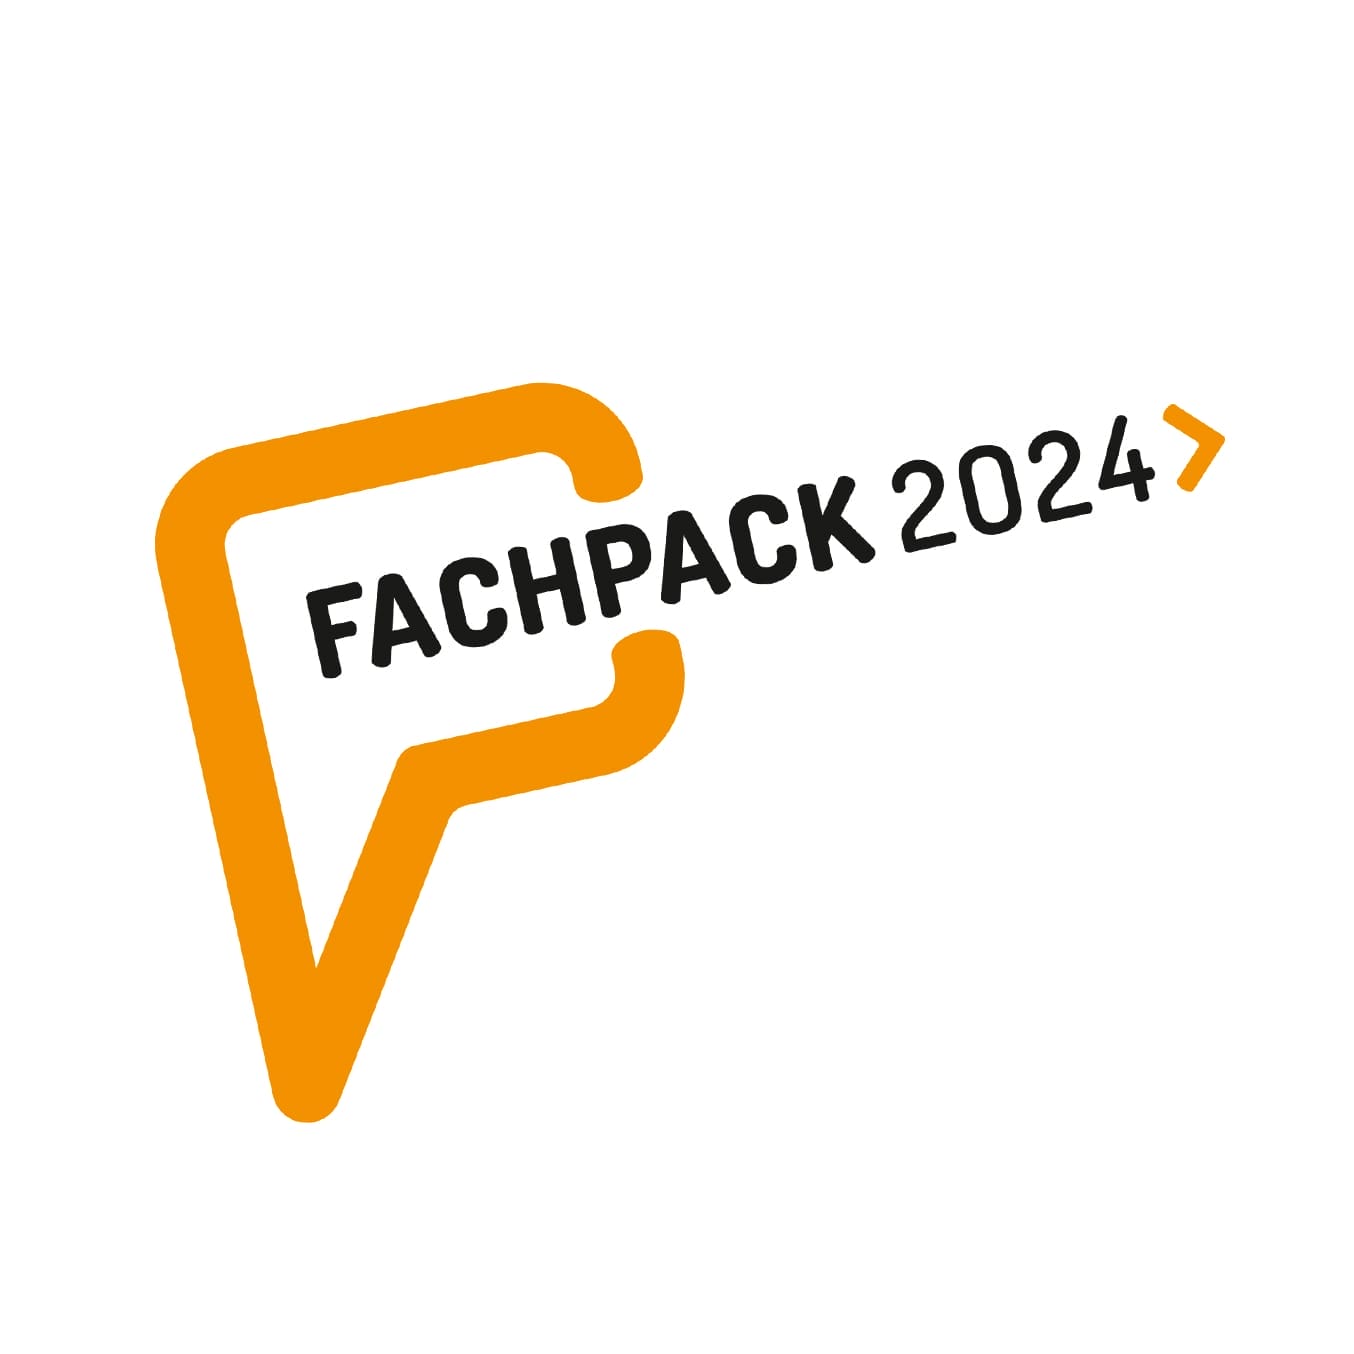 Fachpack 2024